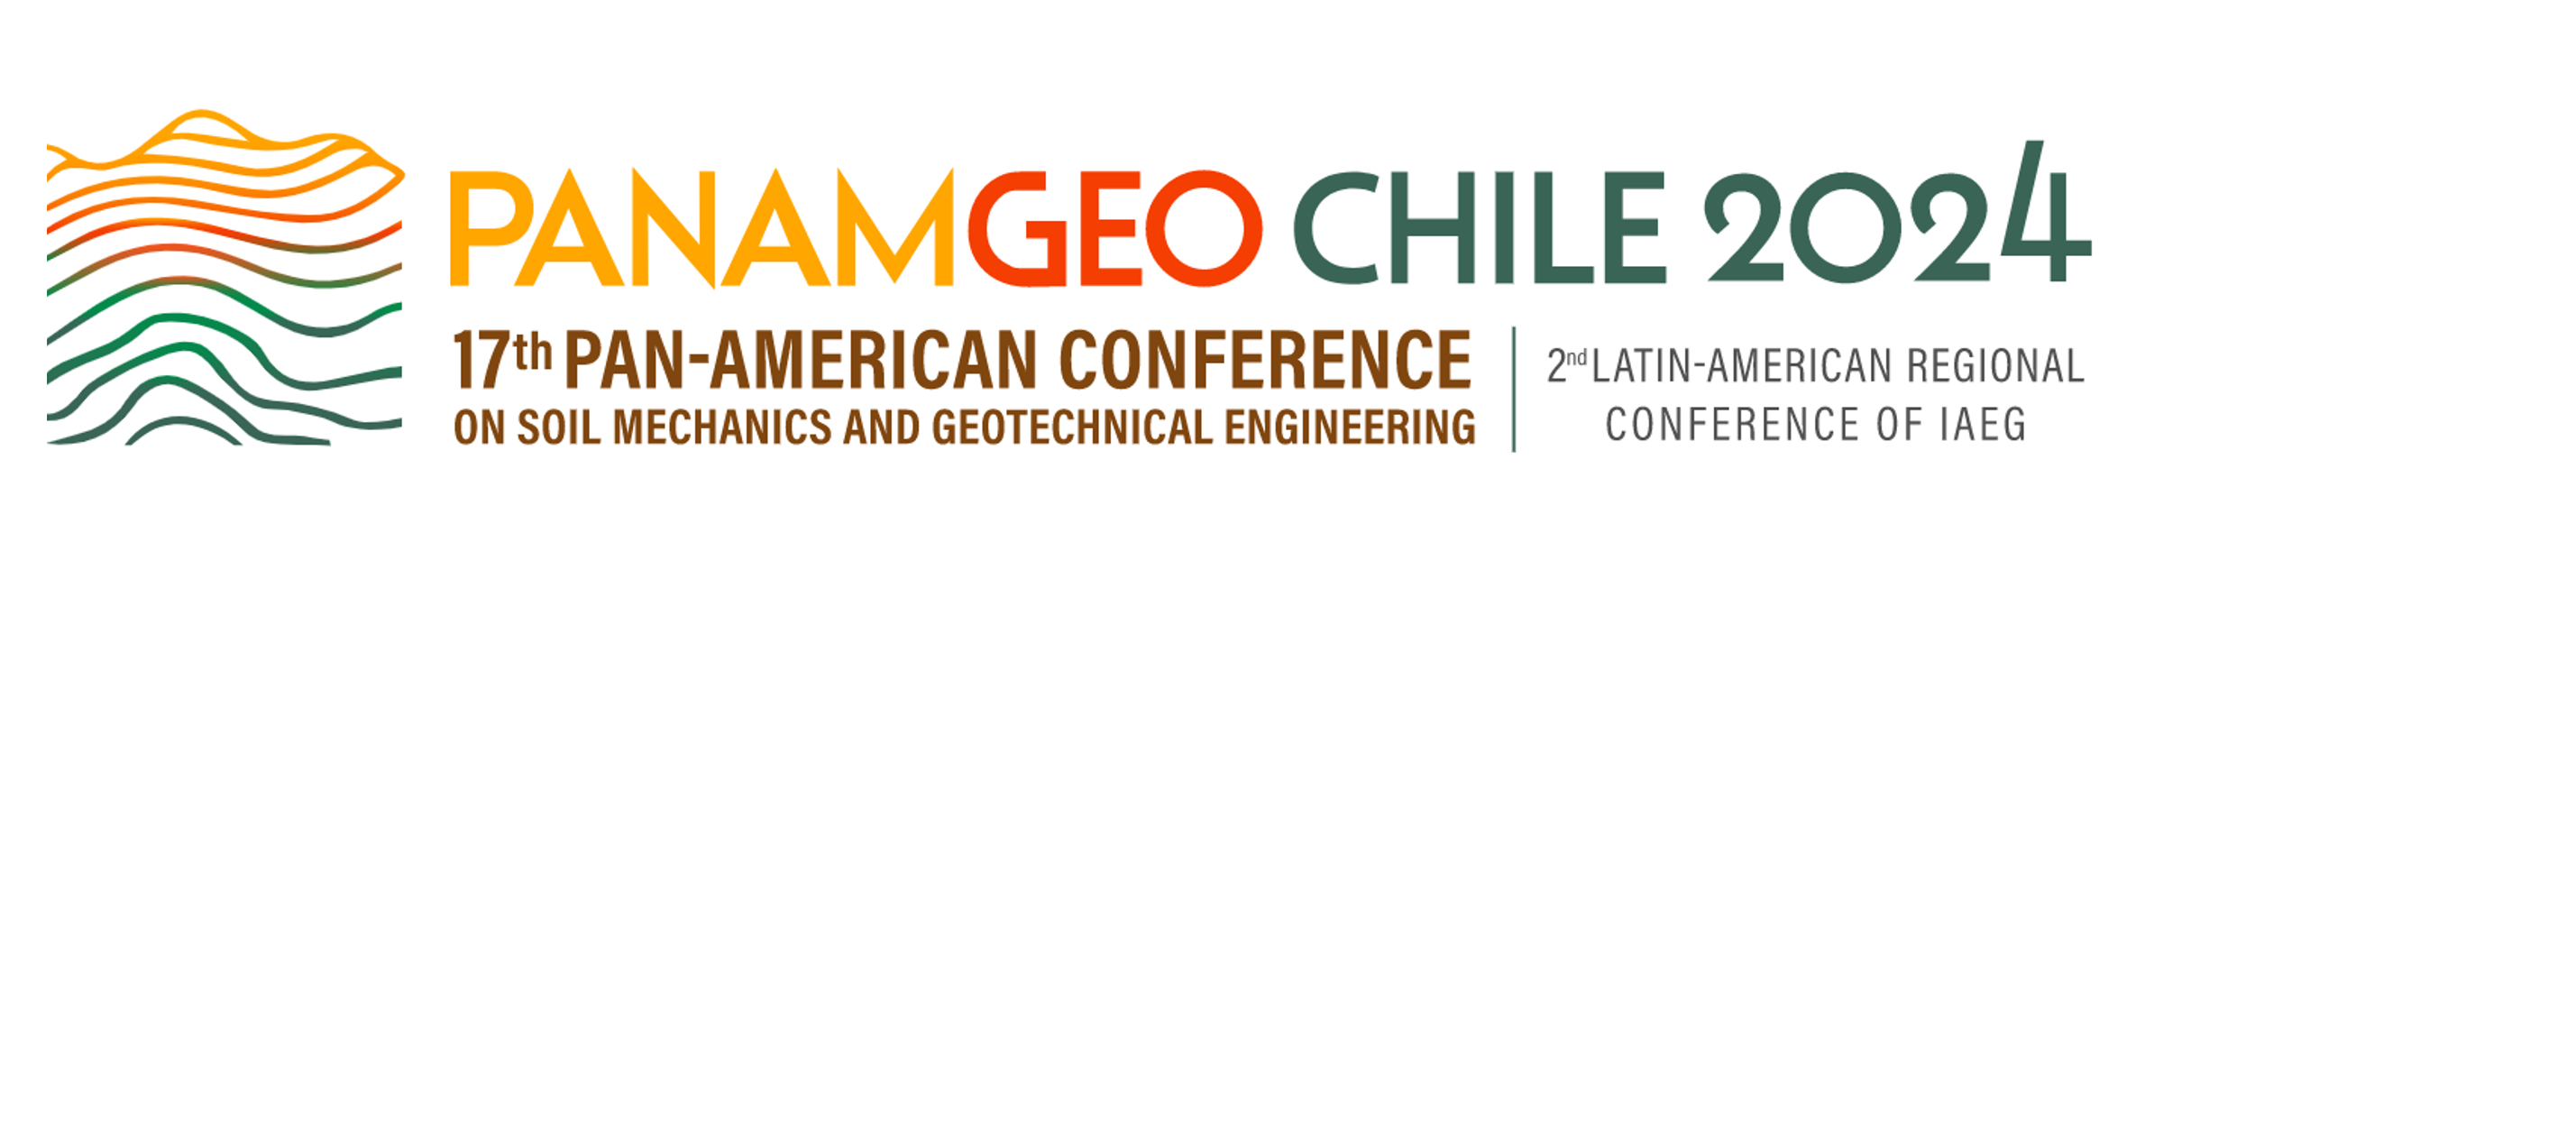 17th Pan-American Conference on Soil Mechanics and Geotechnical Engineering